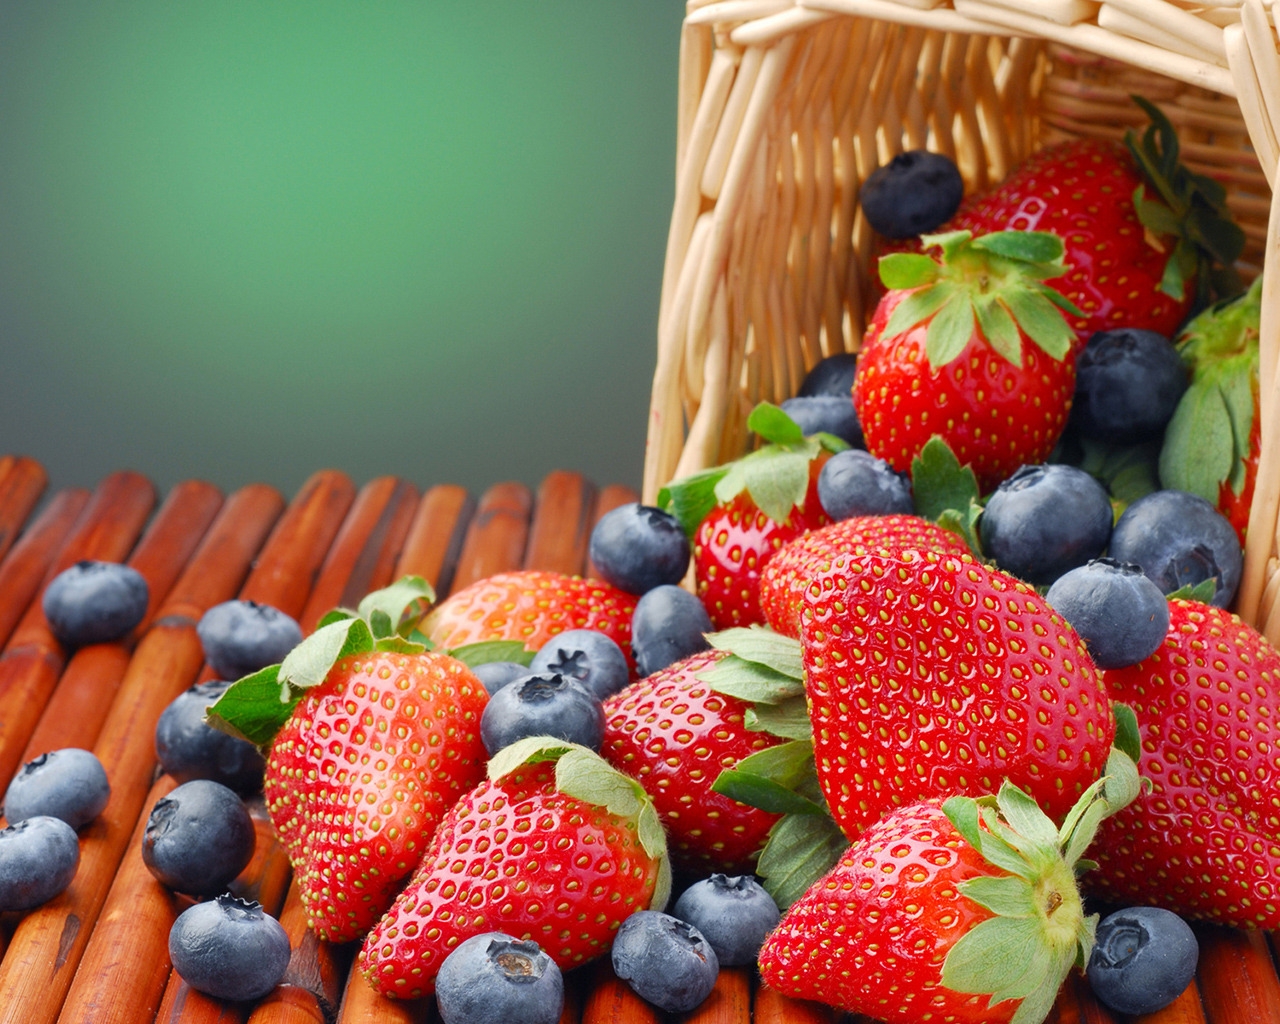 Blueberry and Strawberry for 1280 x 1024 resolution